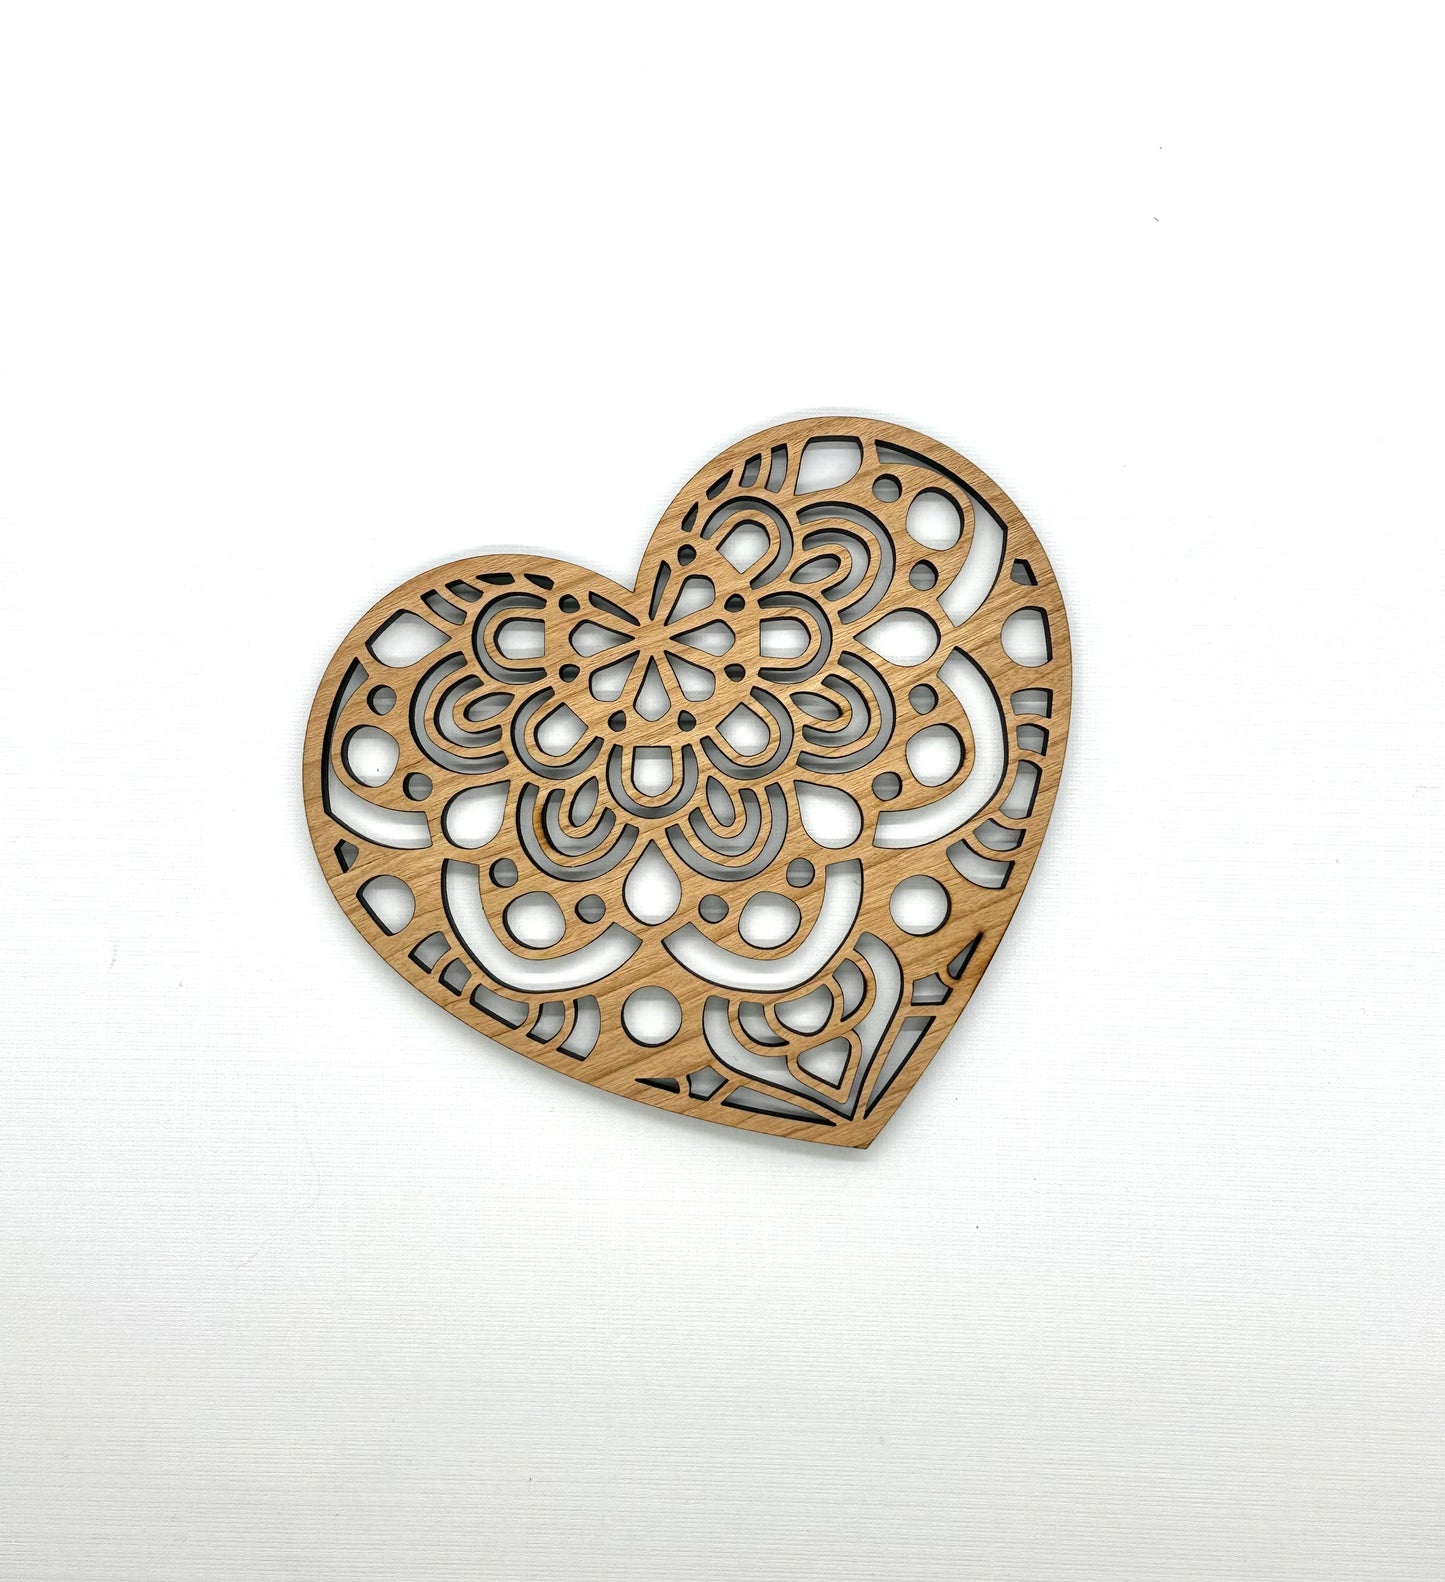 Artisan-Crafted Wooden Heart: A Perfect Gesture for Valentine's & Anniversaries